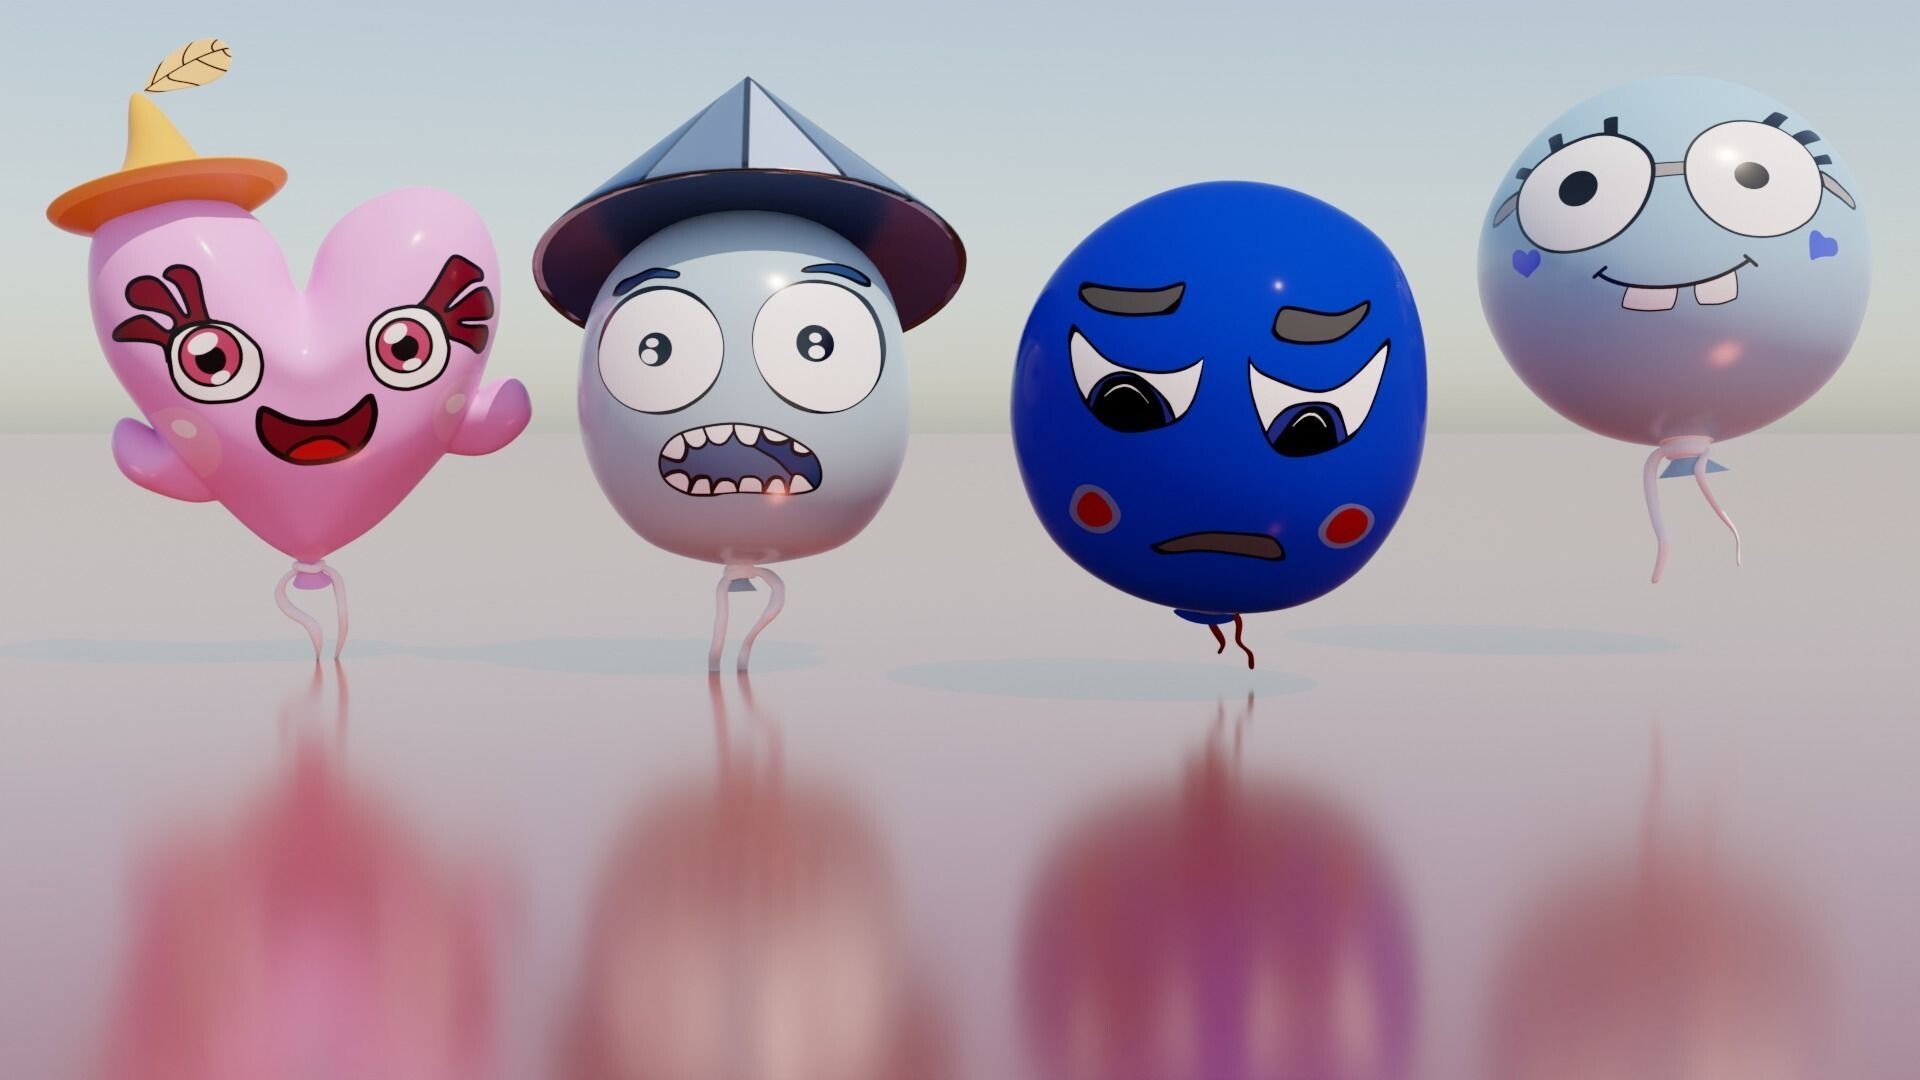 ArtStation - Hyper-Casual Funny characters balloon pack